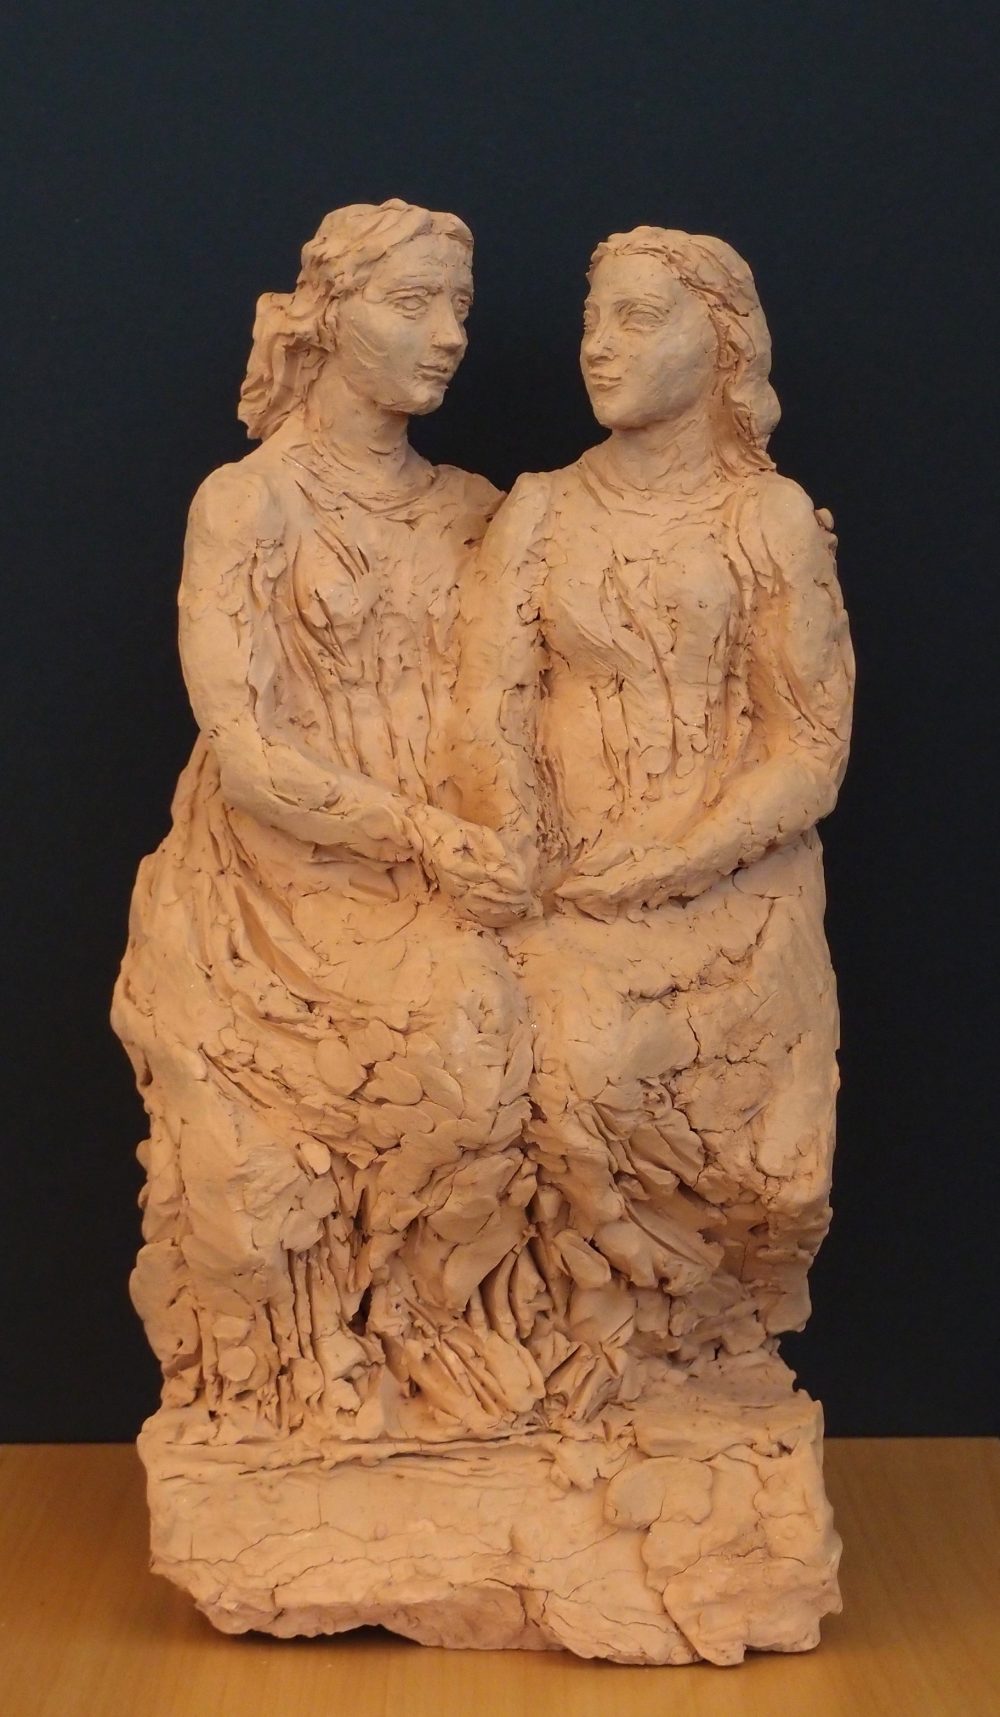 Two Seated Women, (Mary and Anne)